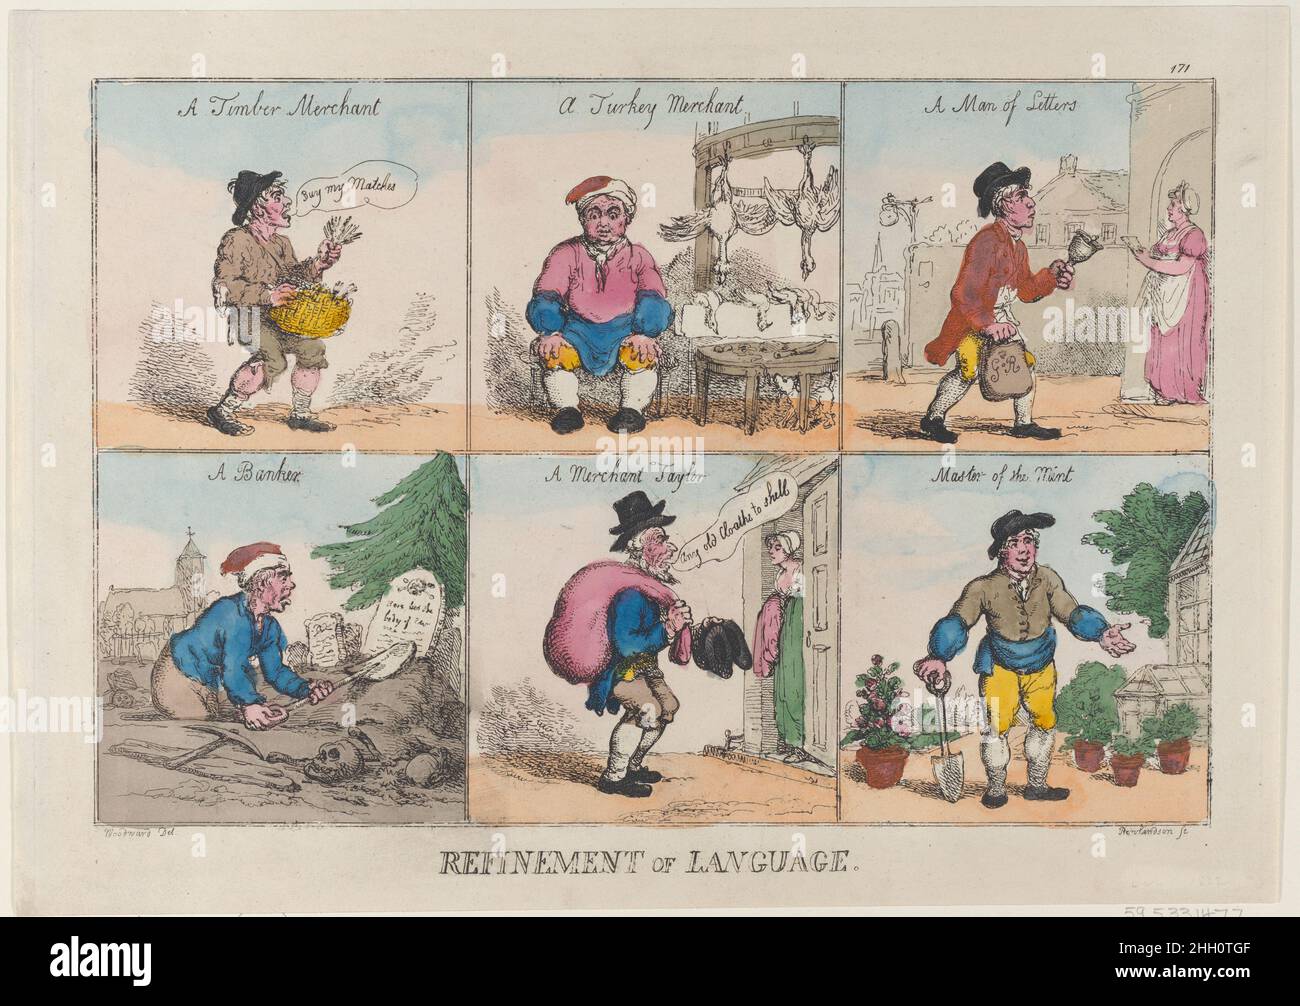 Refinement of Language October 1, 1802 Thomas Rowlandson A design in six squares, arranged in two rows, with six different men performing jobs: A Timber Merchant, A Turkey Merchant, A Man of Letters, A Banker, A Merchant Taylor, and Master of the Mint.. Refinement of Language. Thomas Rowlandson (British, London 1757–1827 London). October 1, 1802. Hand-colored etching. Thomas Tegg (British, 1776–1846). Prints Stock Photo